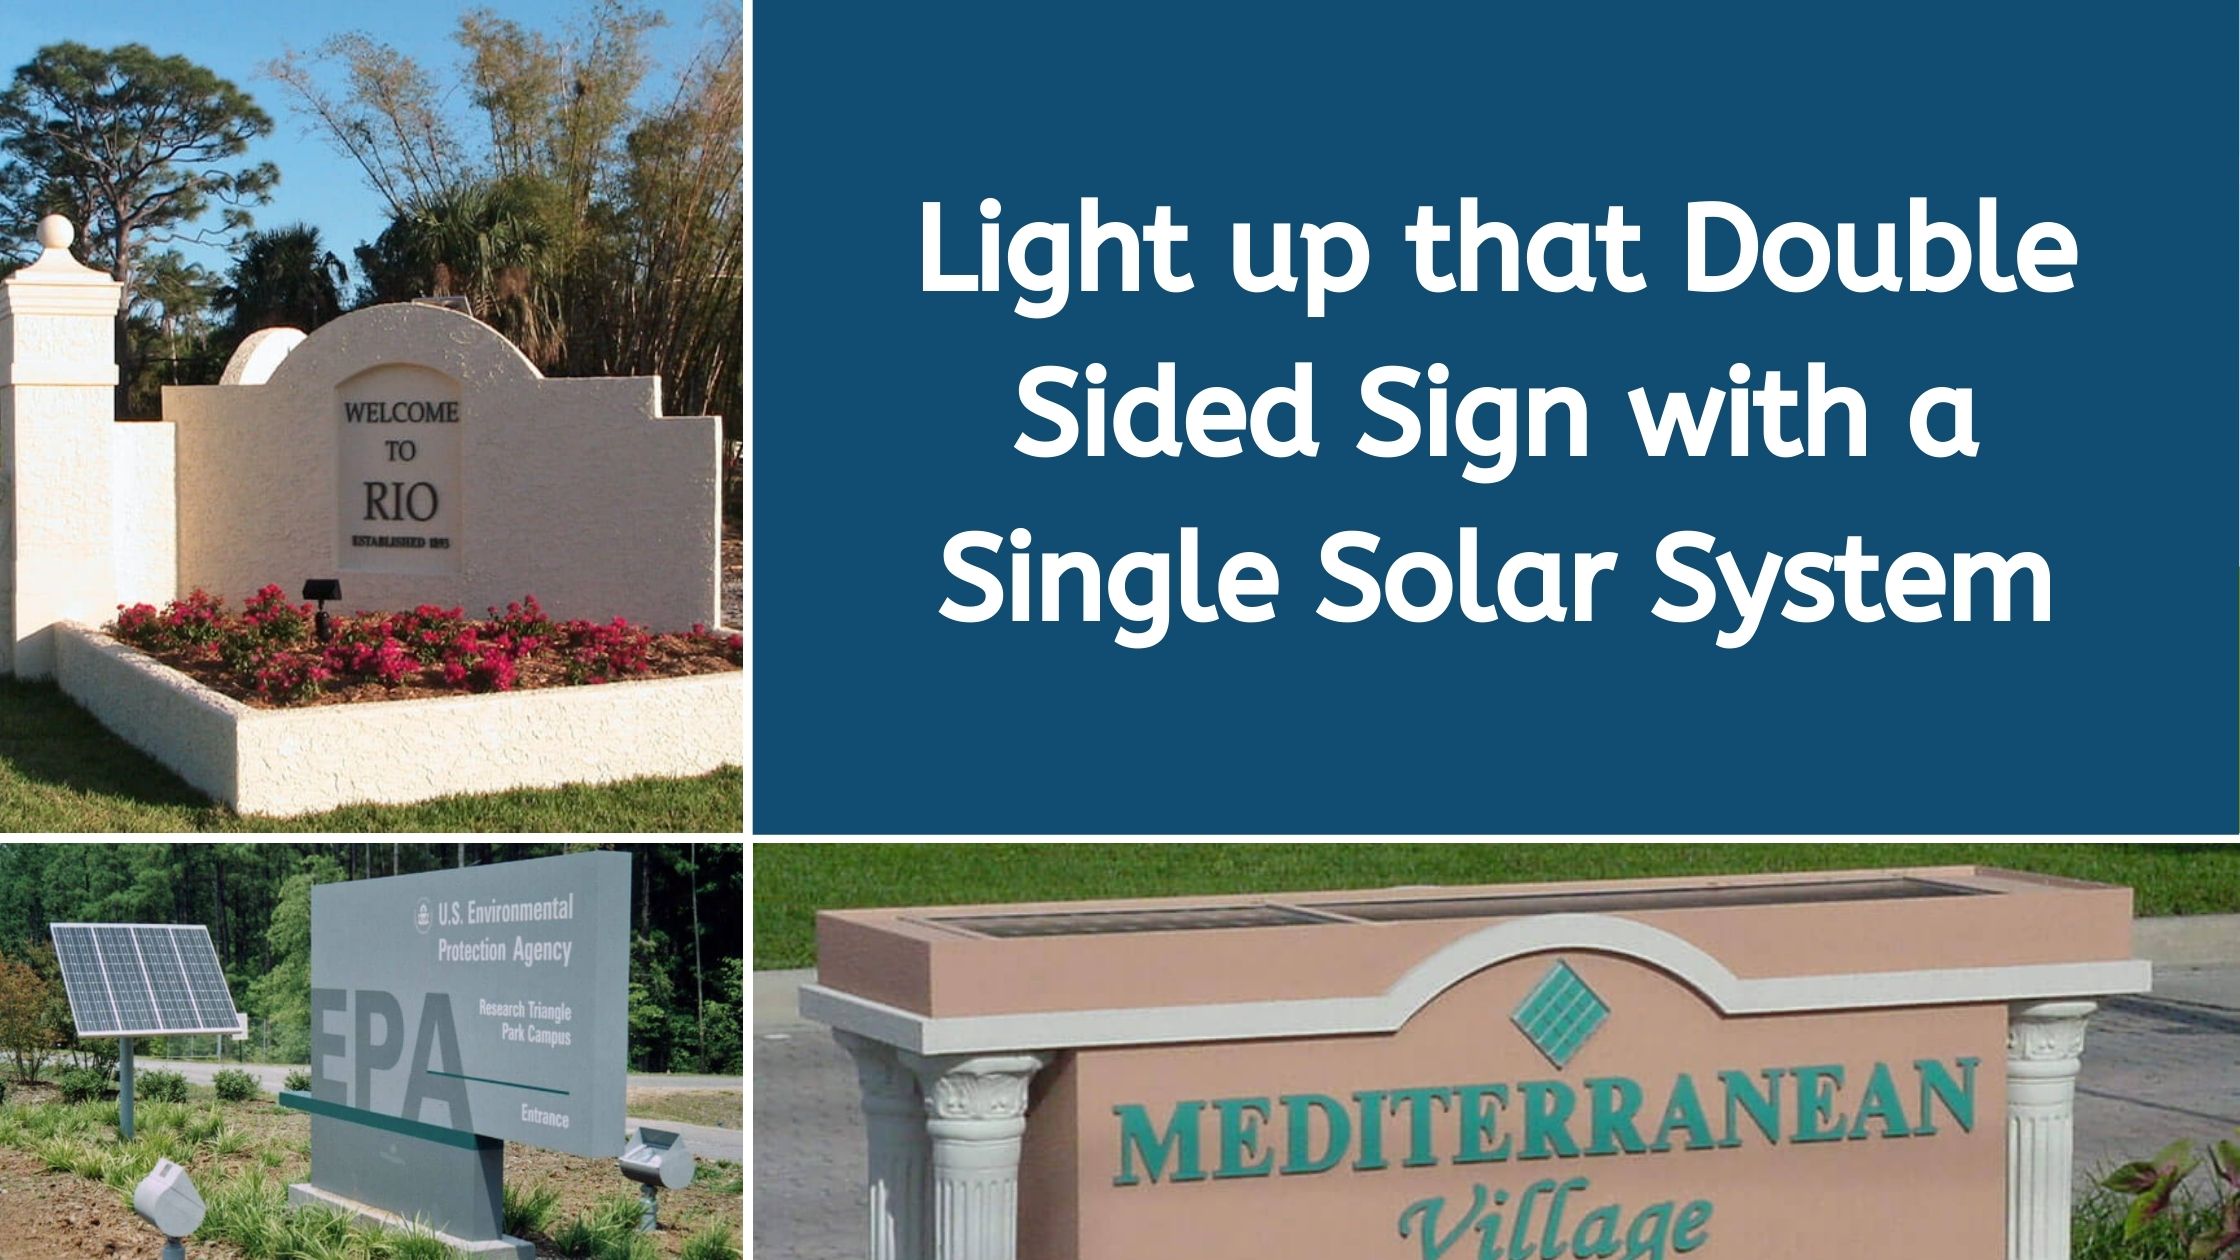 Light up that Double Sided Sign with a Single Solar System